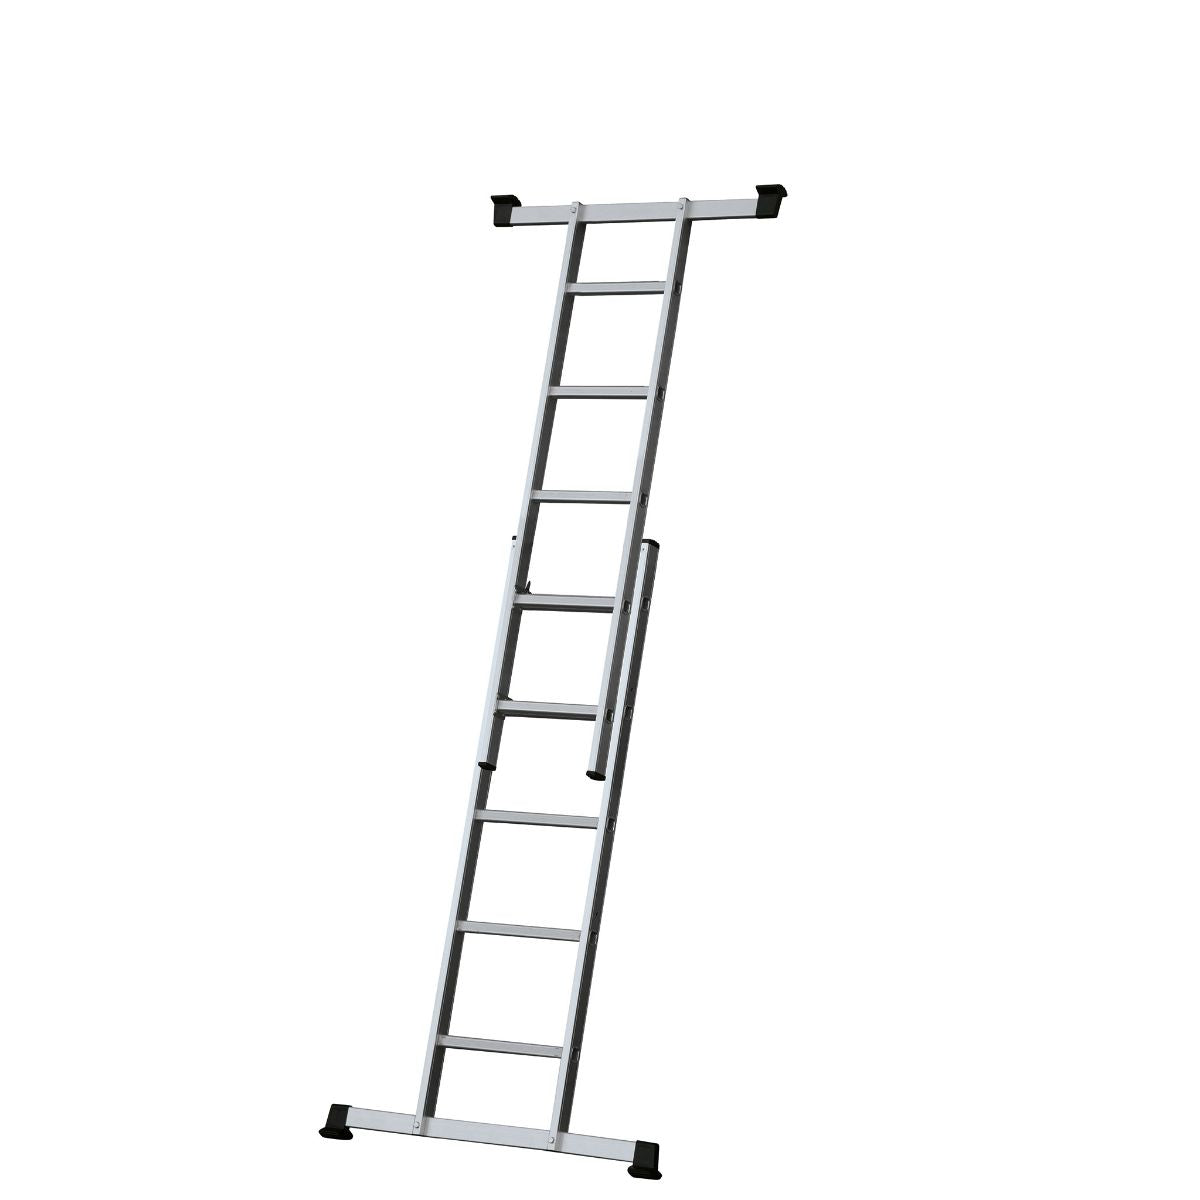 Youngman Combination Ladder Pro-Deck 5 Way 5101518